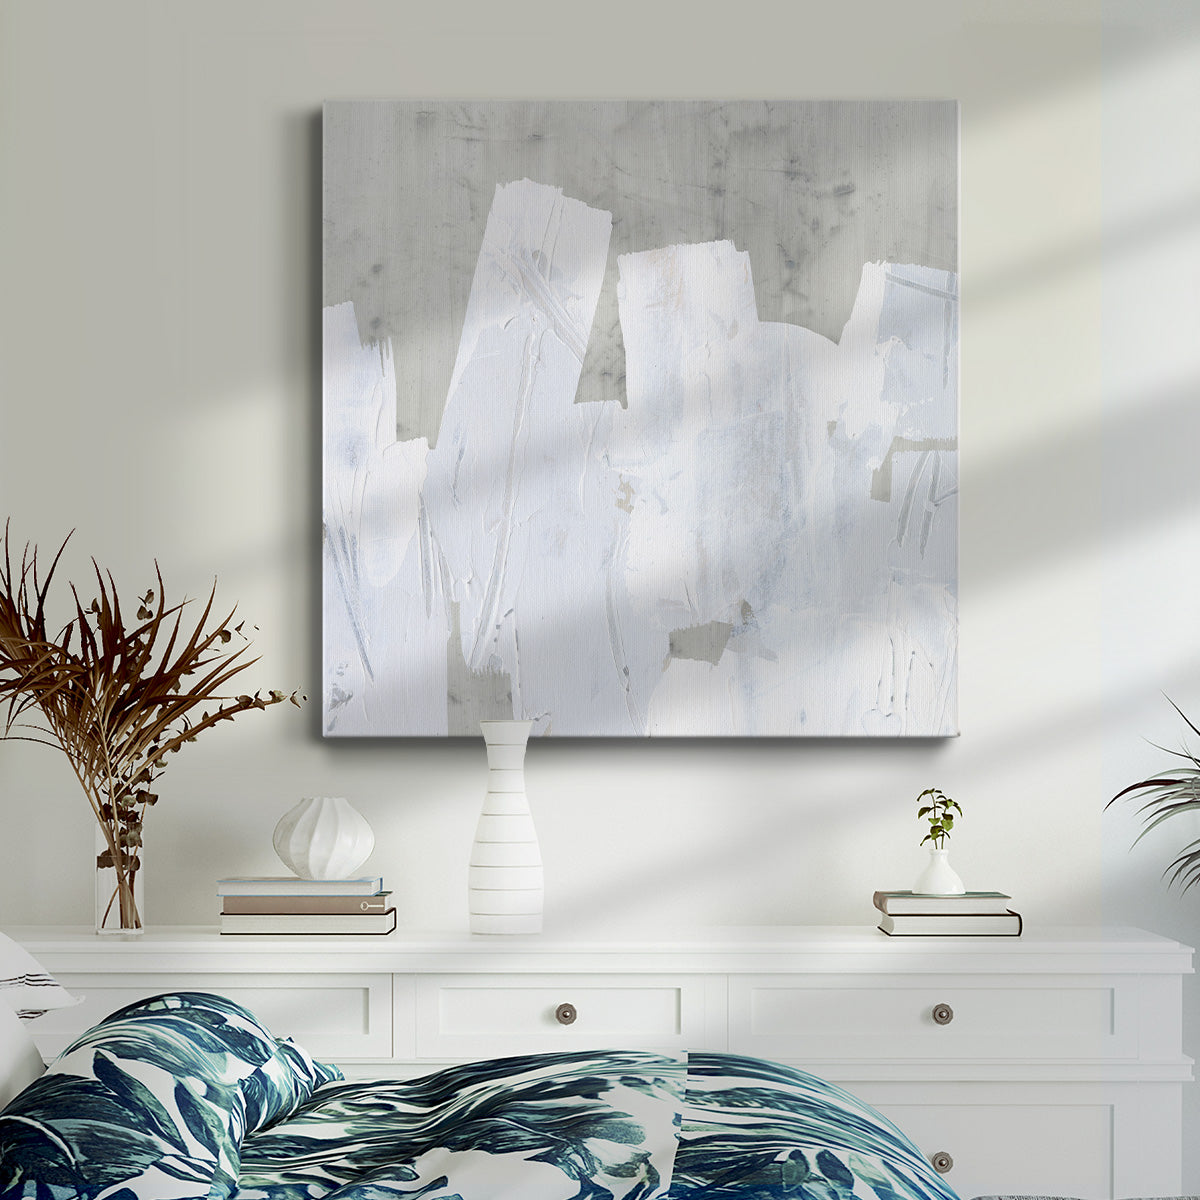 Ice Shield I-Premium Gallery Wrapped Canvas - Ready to Hang